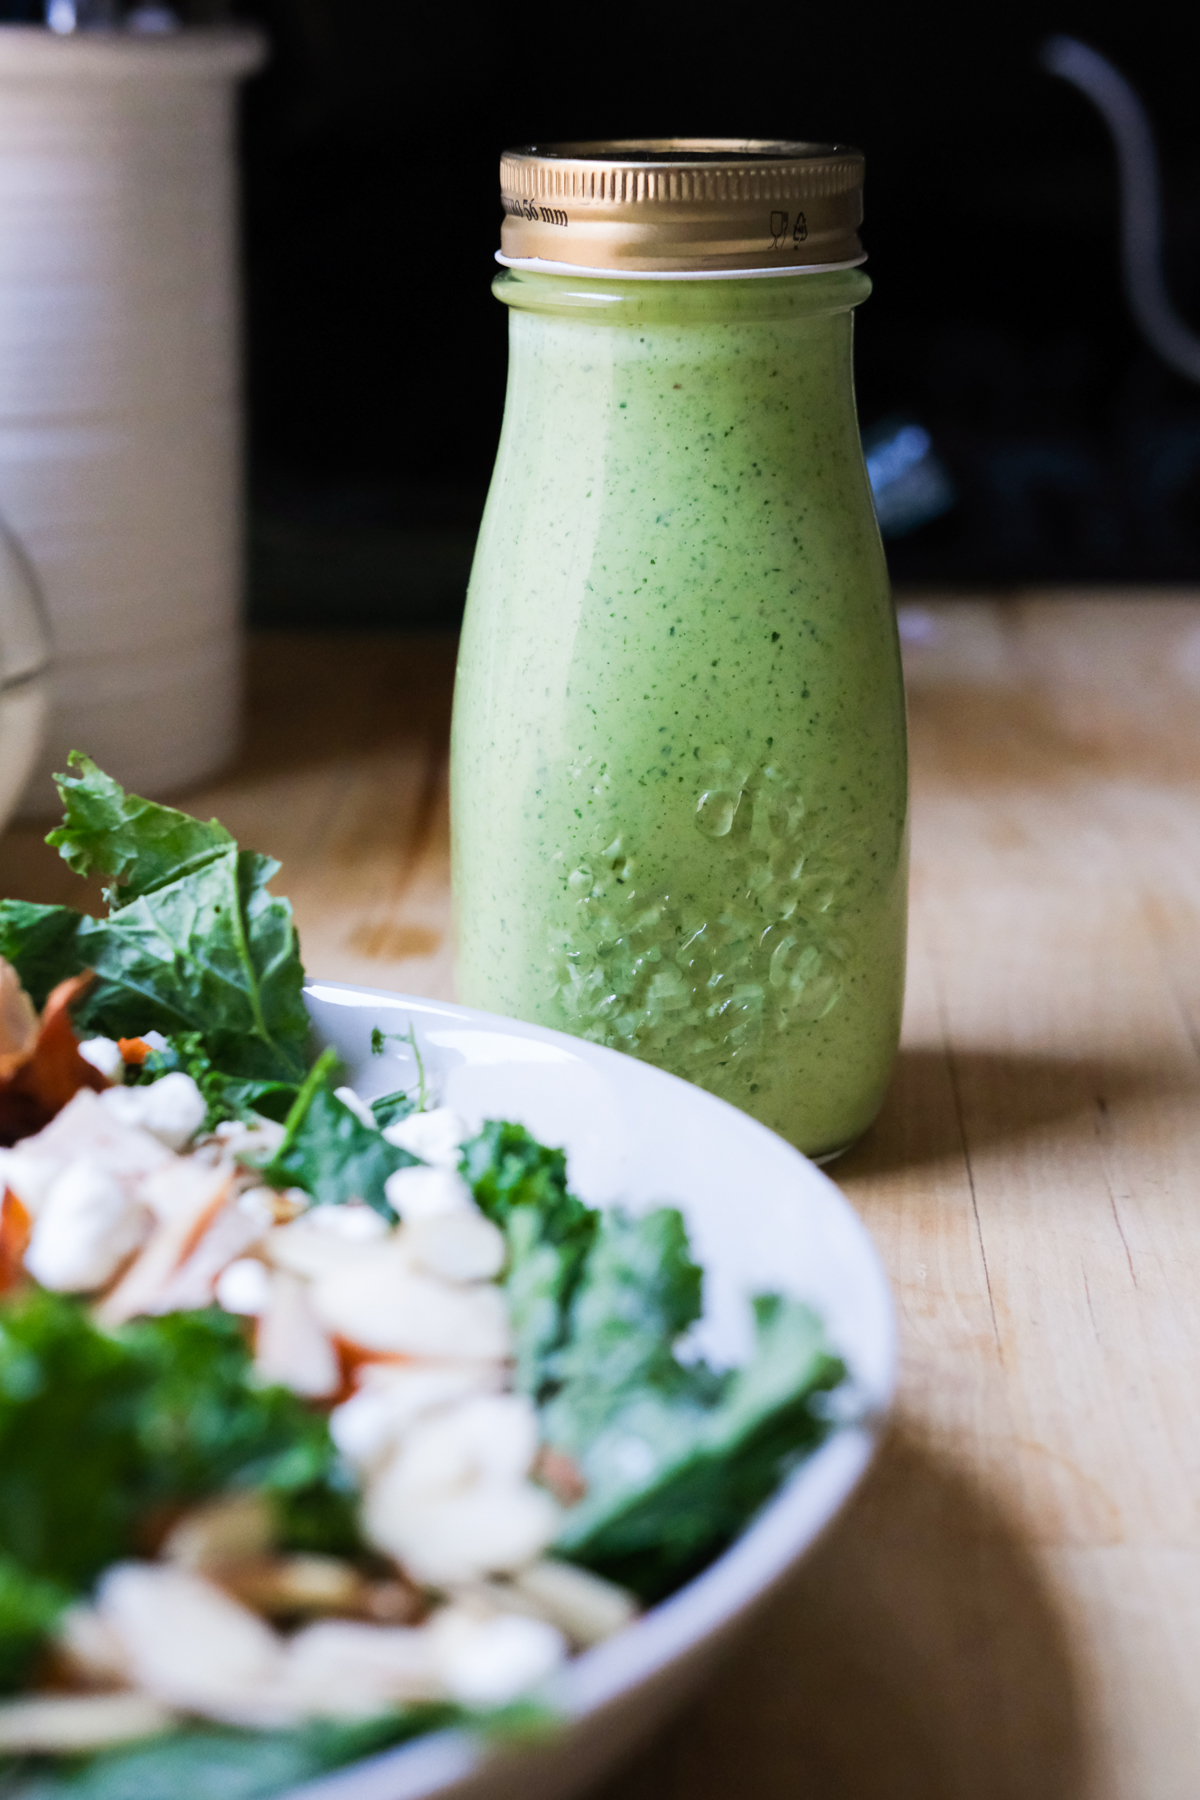 The Green Goddess Dressing You’ll Put On Everything